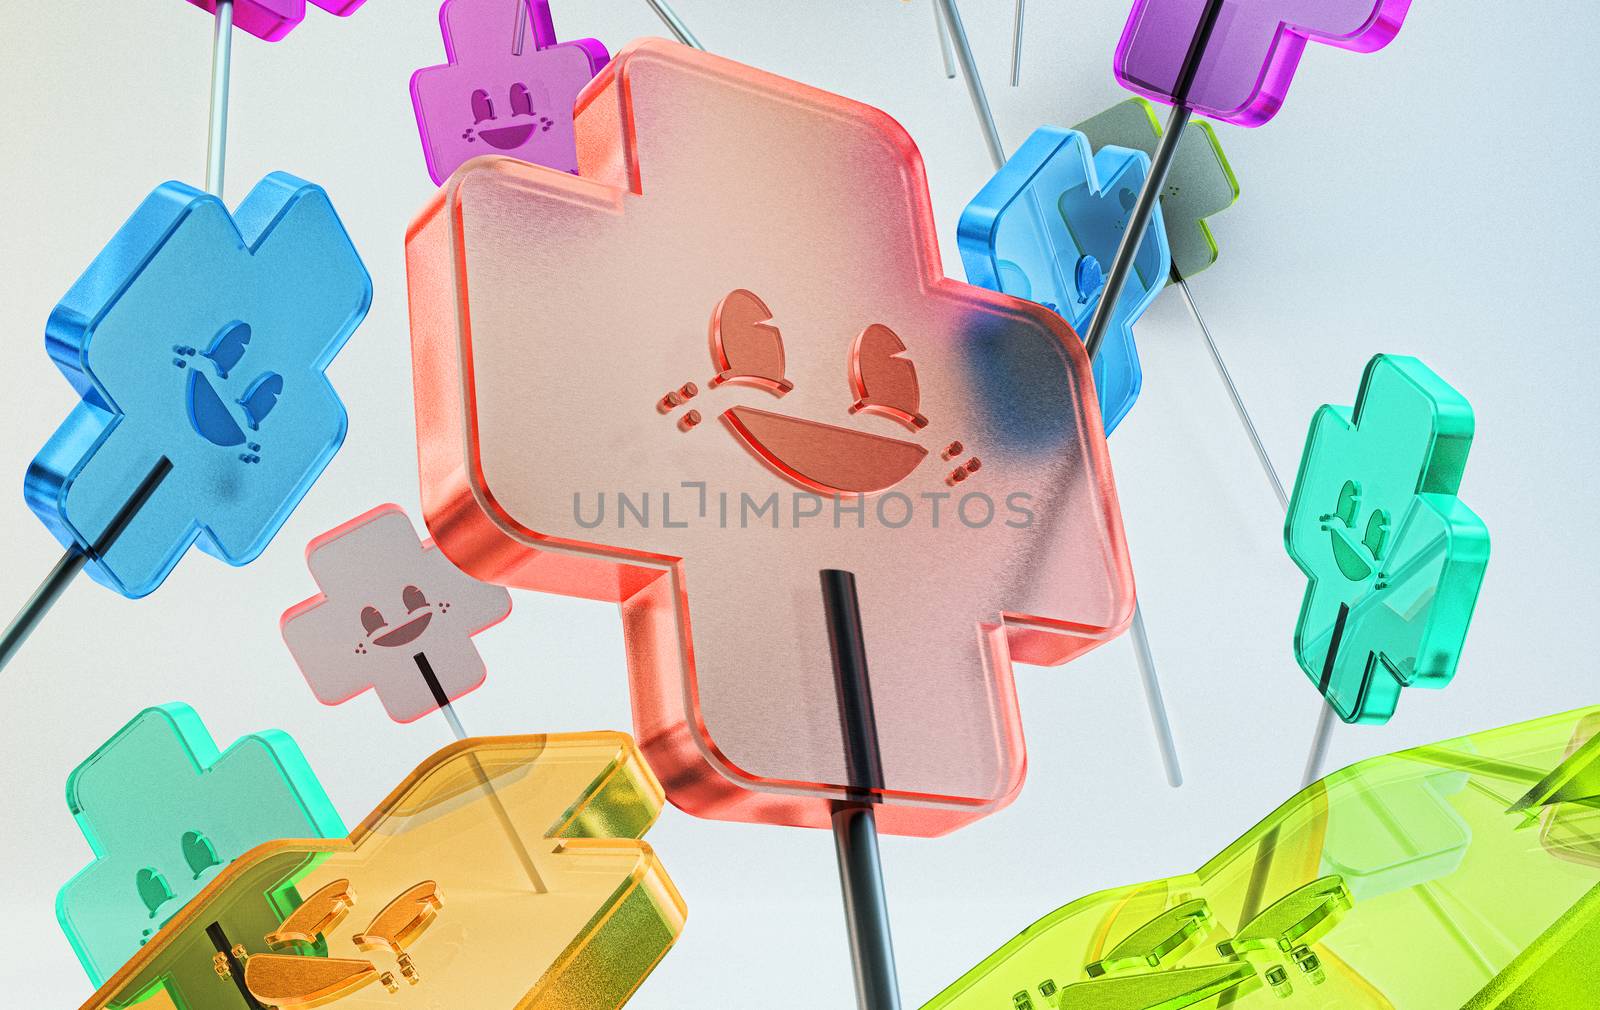 translucent multicolored sweet candies with emoticons on sticks. colorful candy on white background isolated